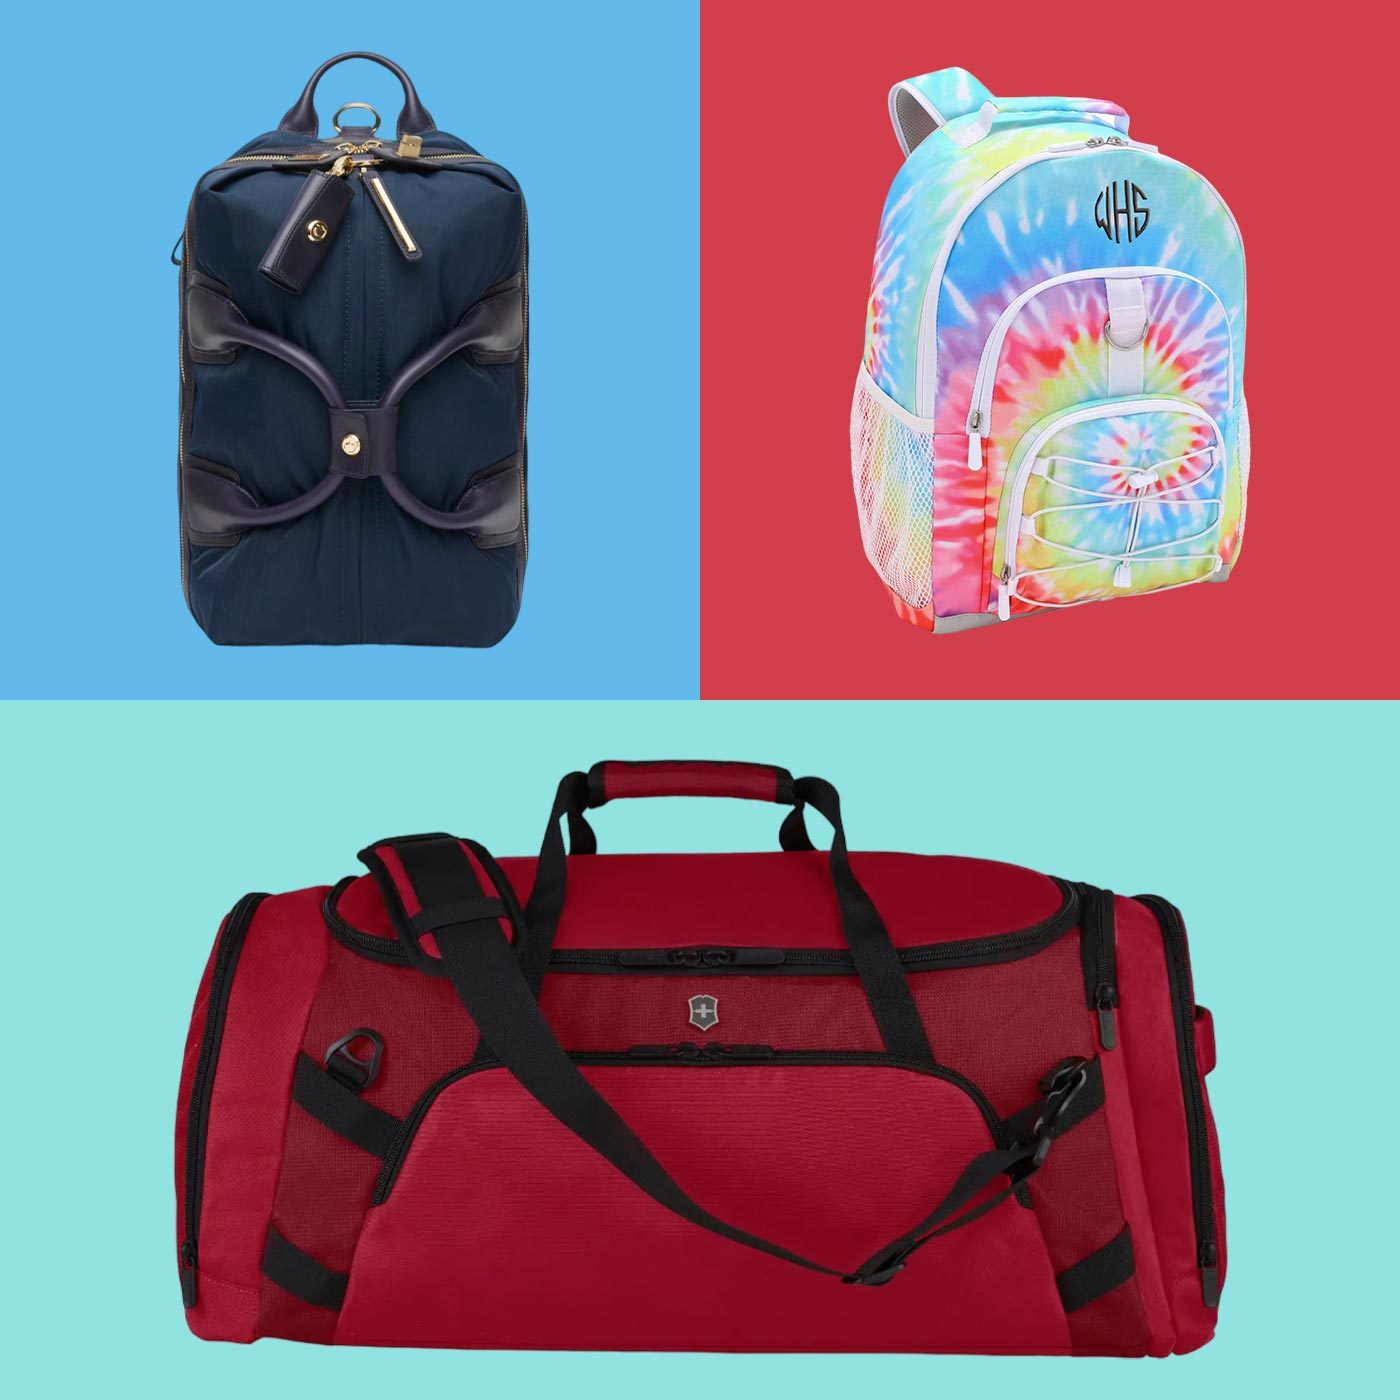 The Best Carry-On Travel Backpacks for 2023